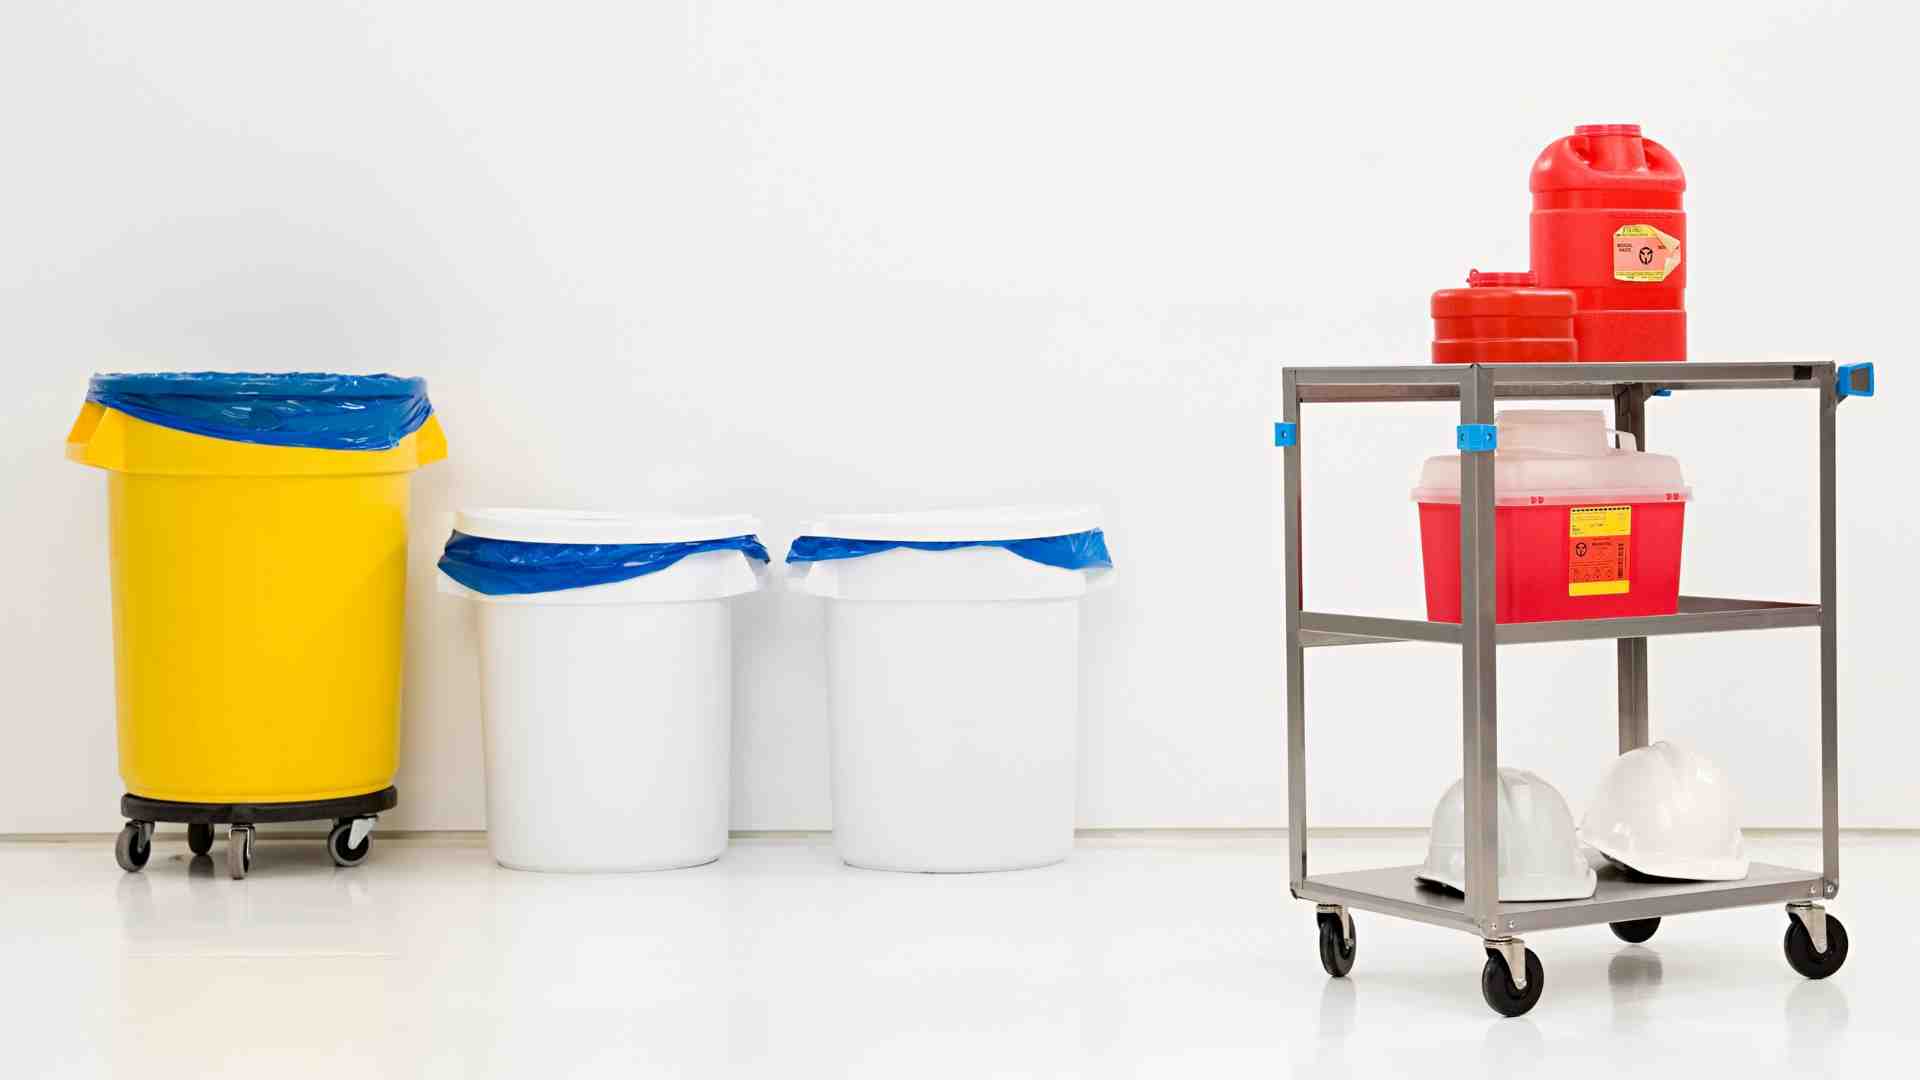 Waste management in healthcare